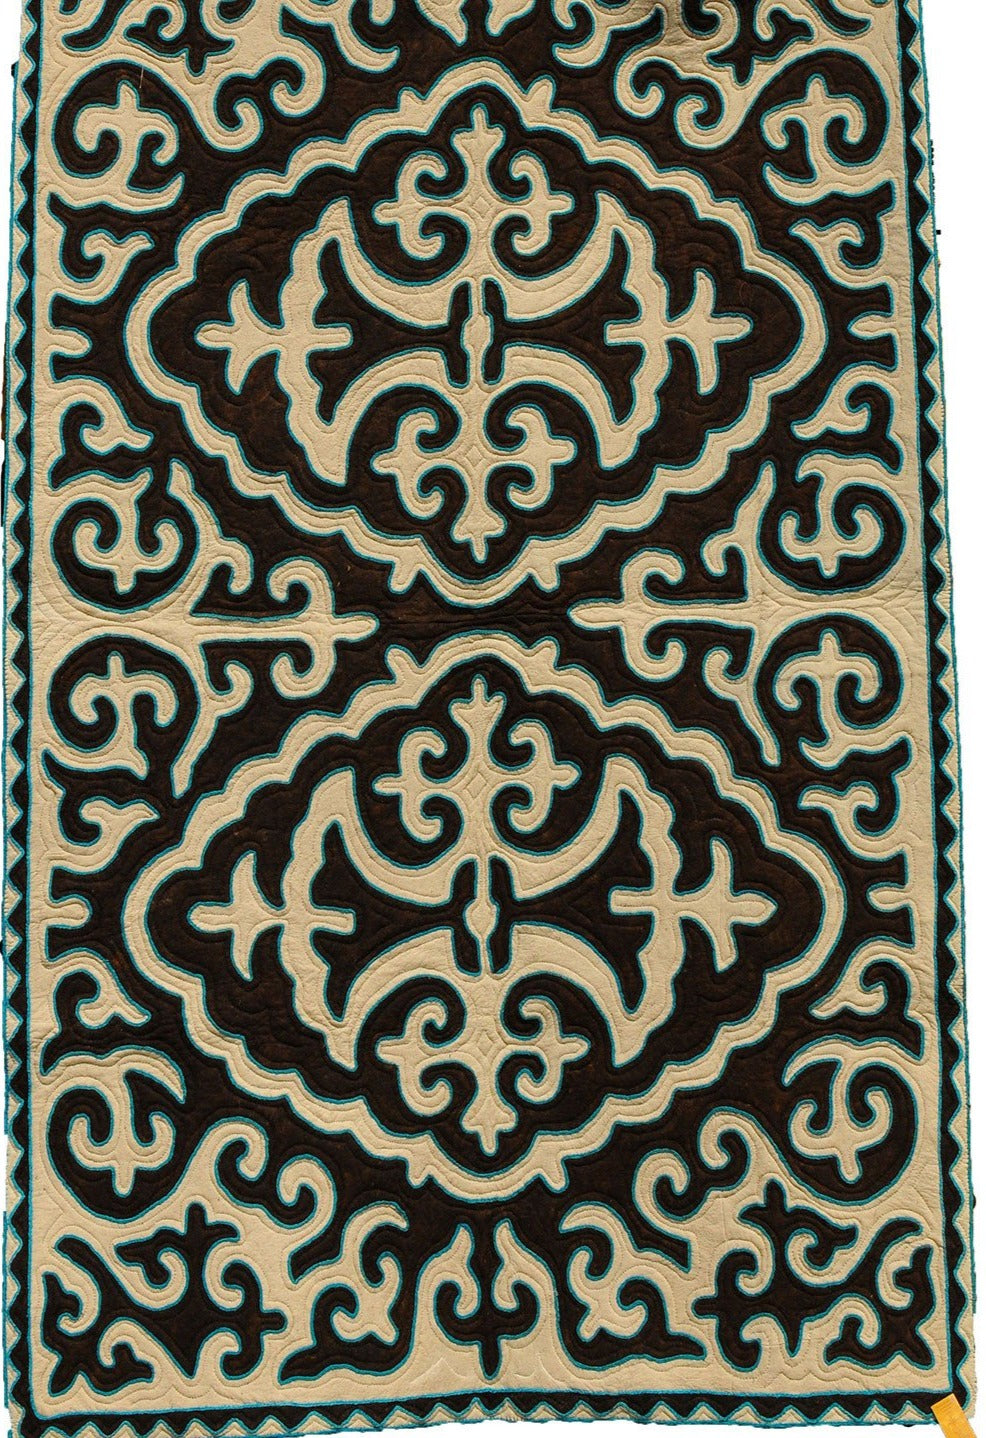 Brown Rug with White Filigree Pattern with Aqua Blue Trim